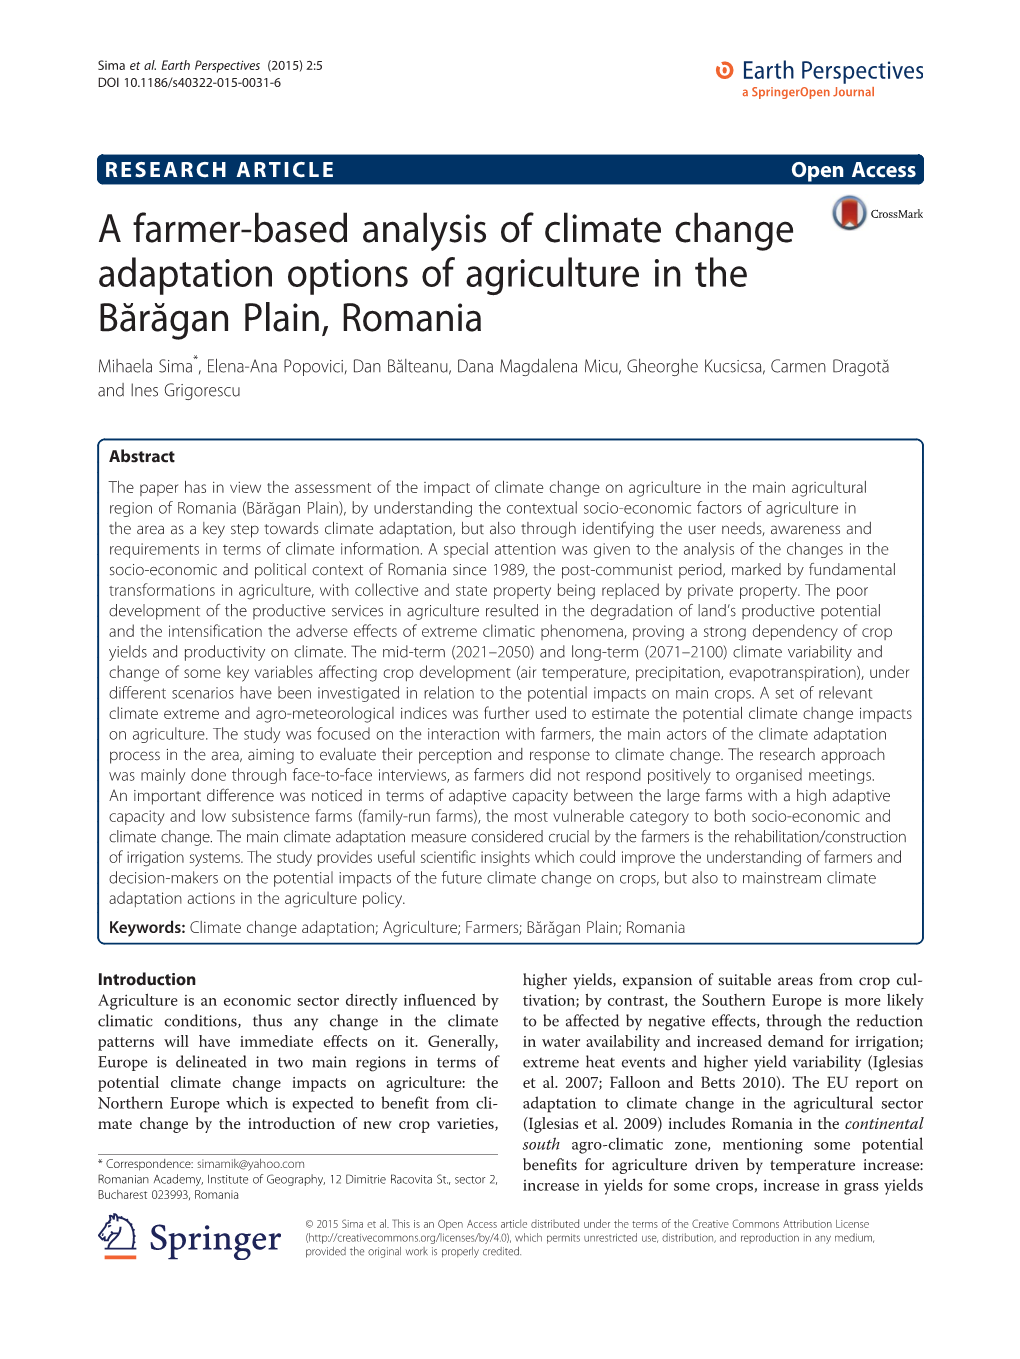 A Farmer-Based Analysis of Climate Change Adaptation Options Of